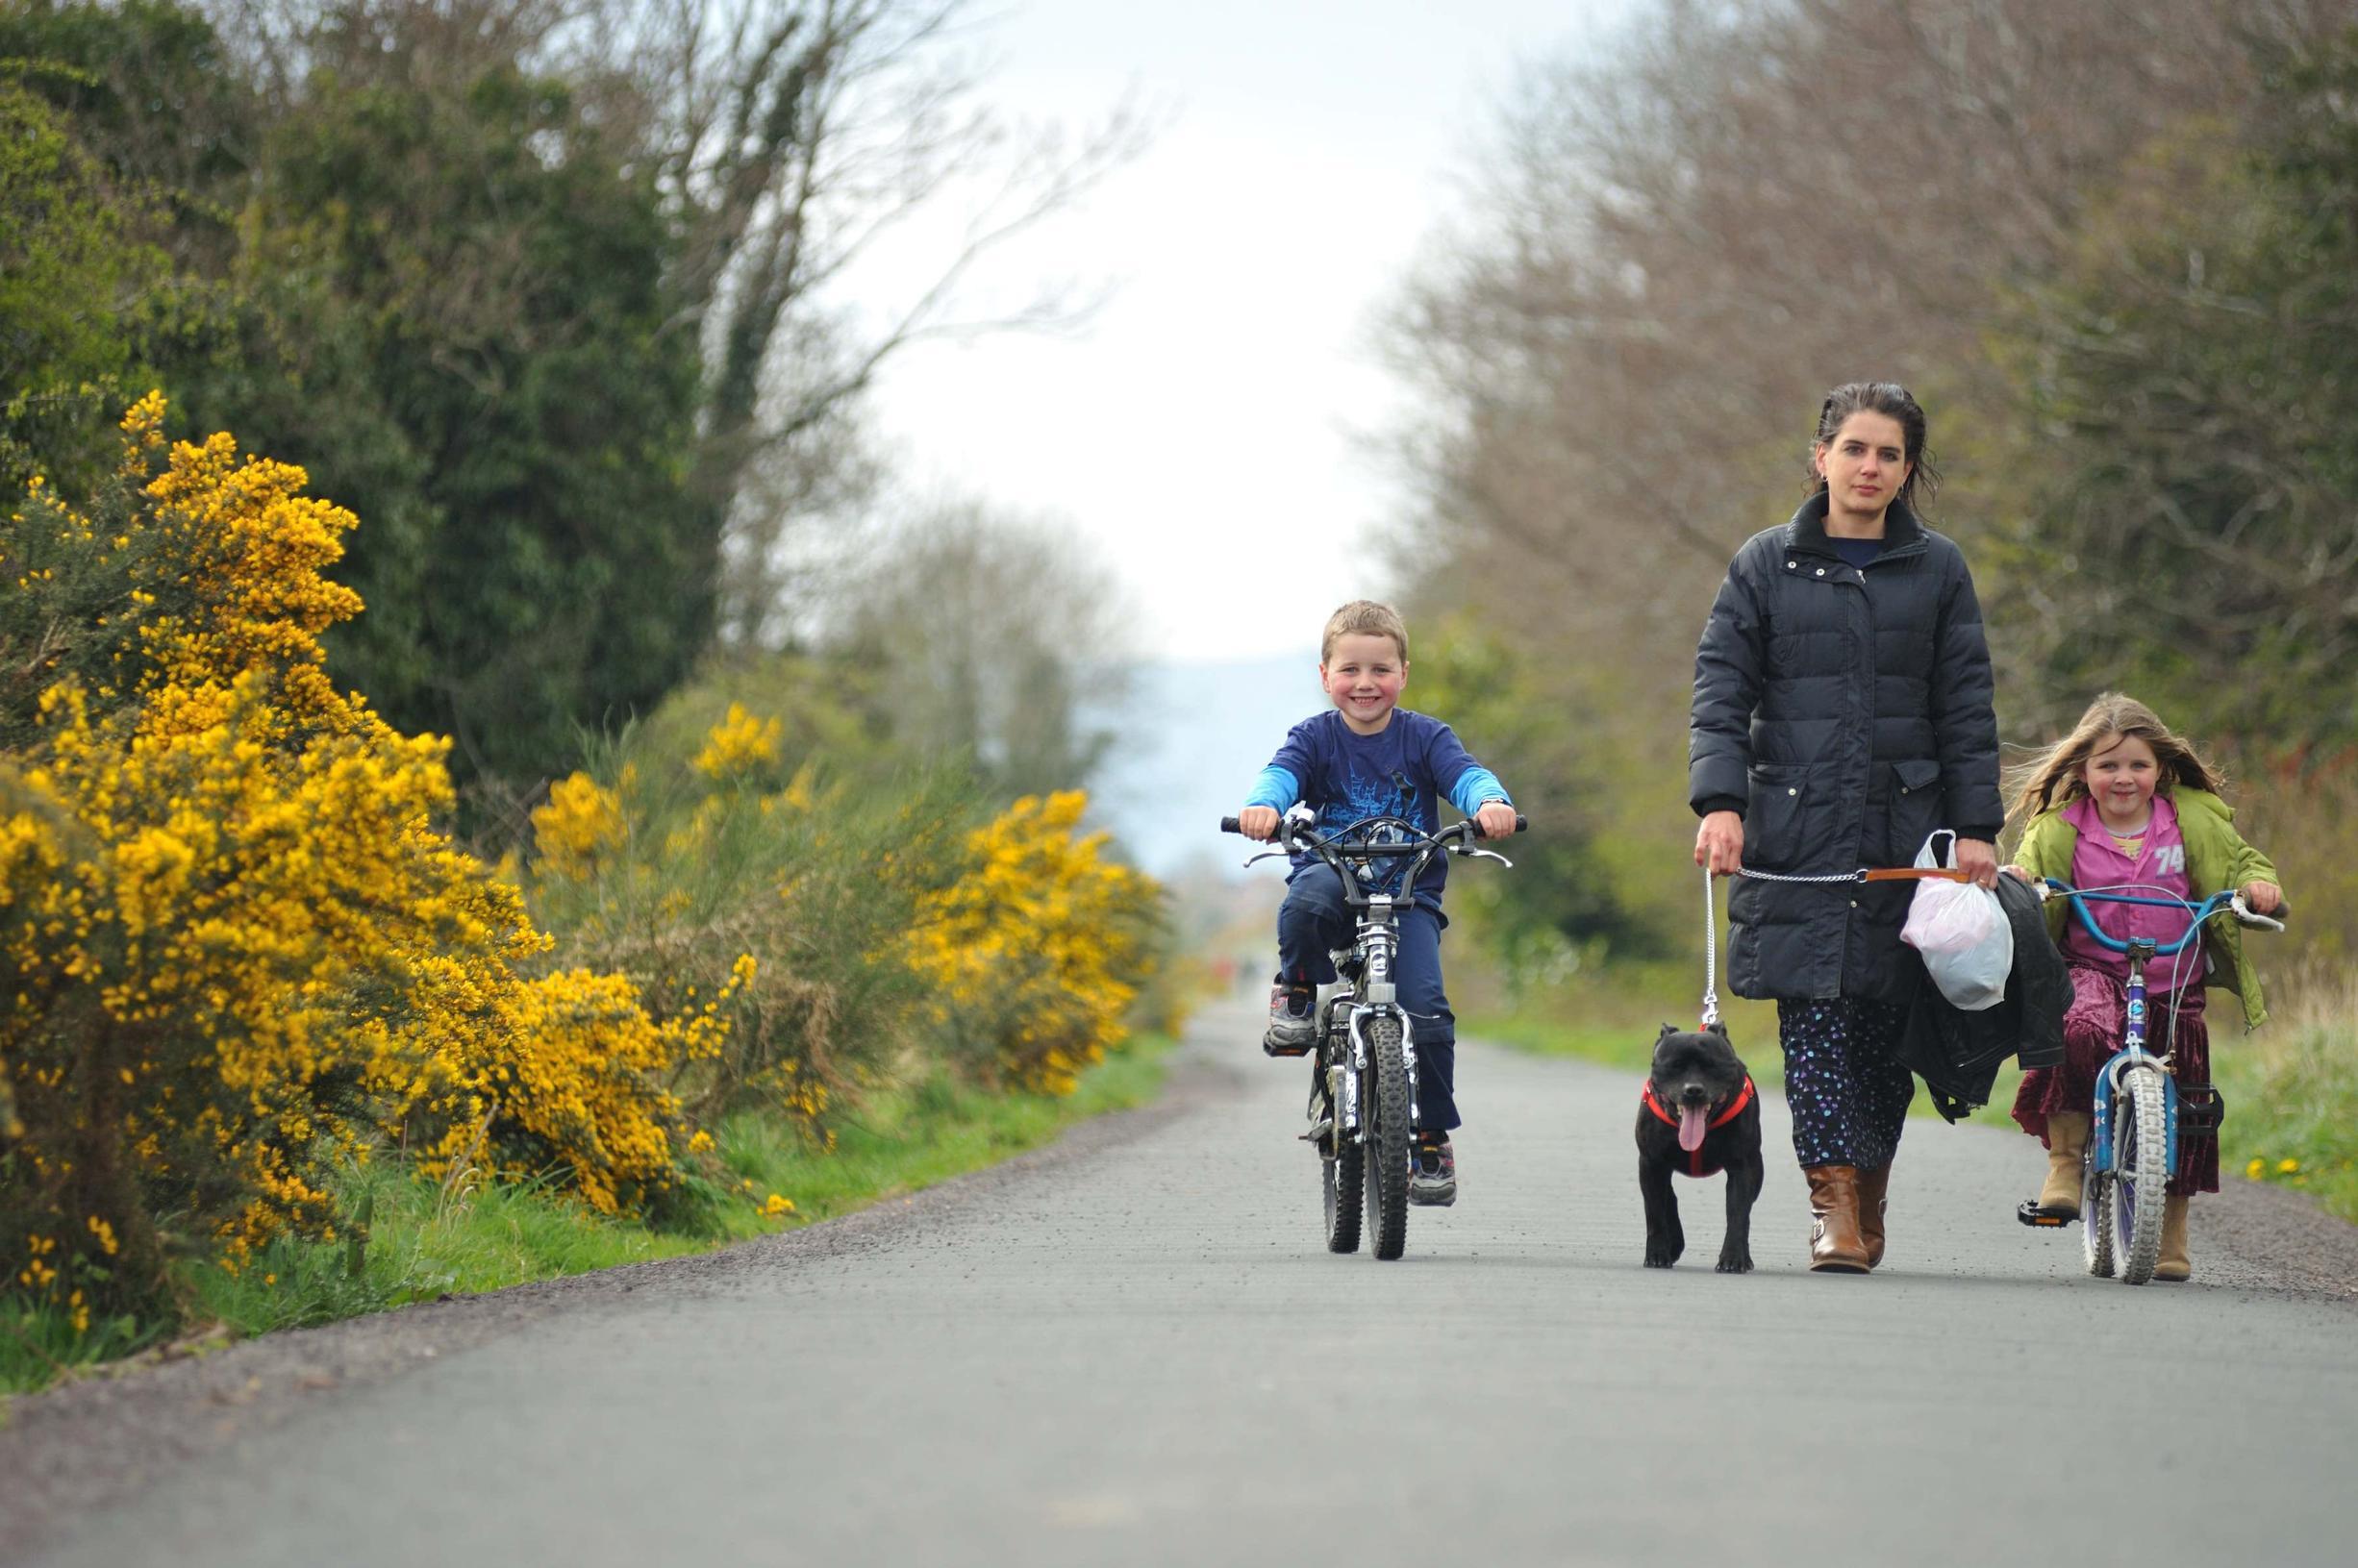 DfT has pledged £35m to improving the National Cycle Network